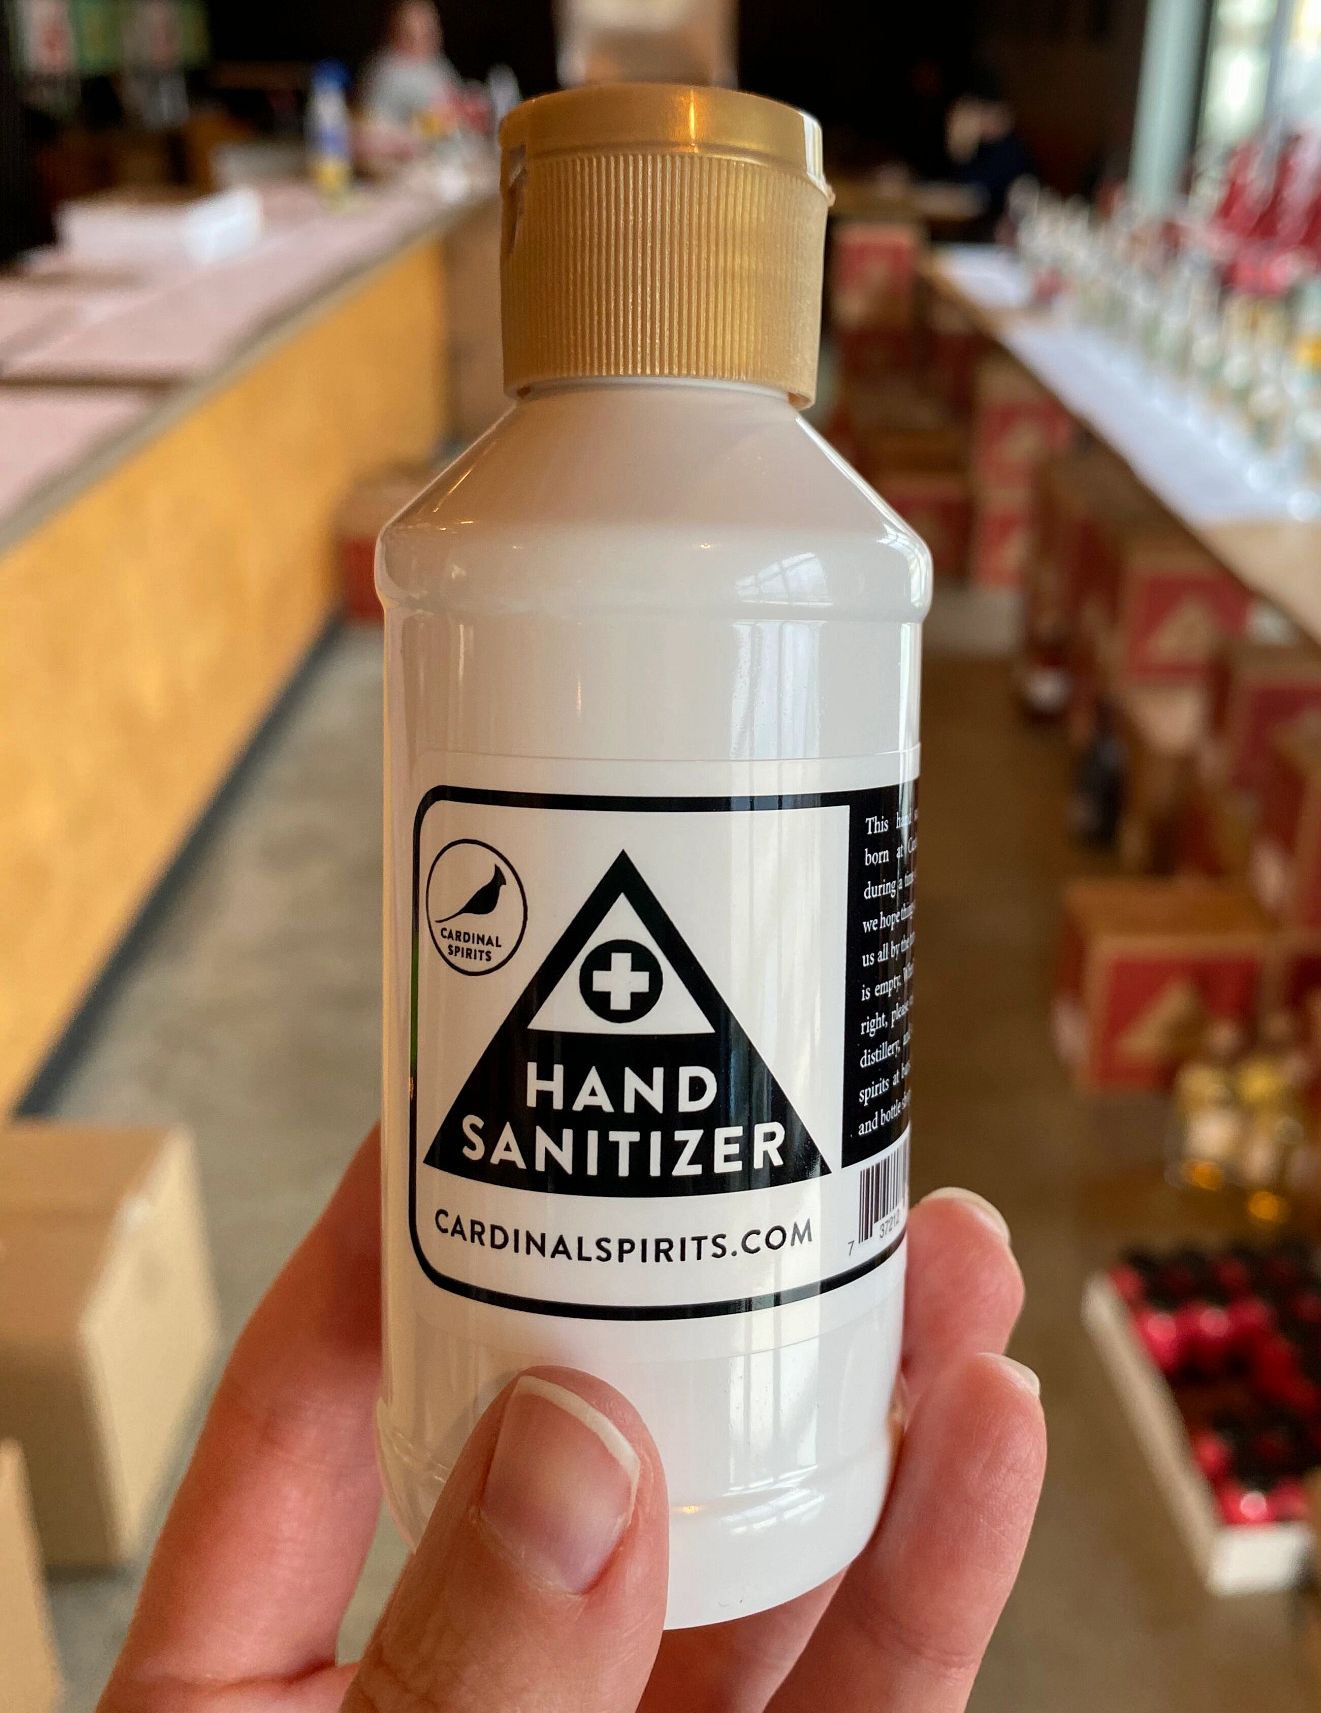 A small bottle of hand sanitizer is held by hand.